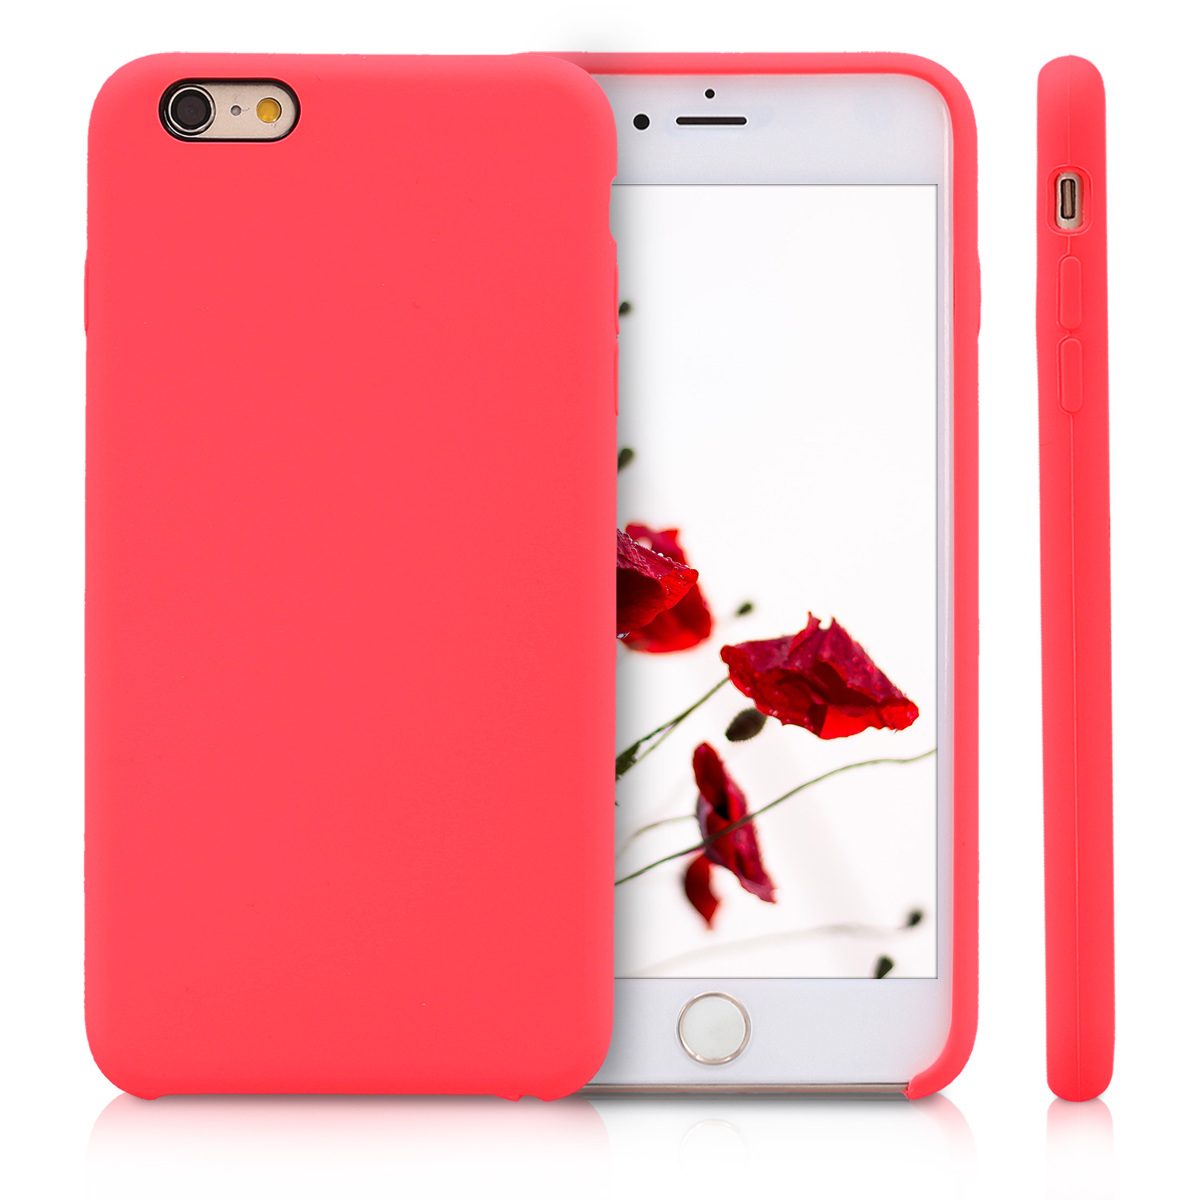 Apple Silicone Case for iPhone 6s Plus and iPhone 6 Plus - Mint - Walmart.com - Walmart.com